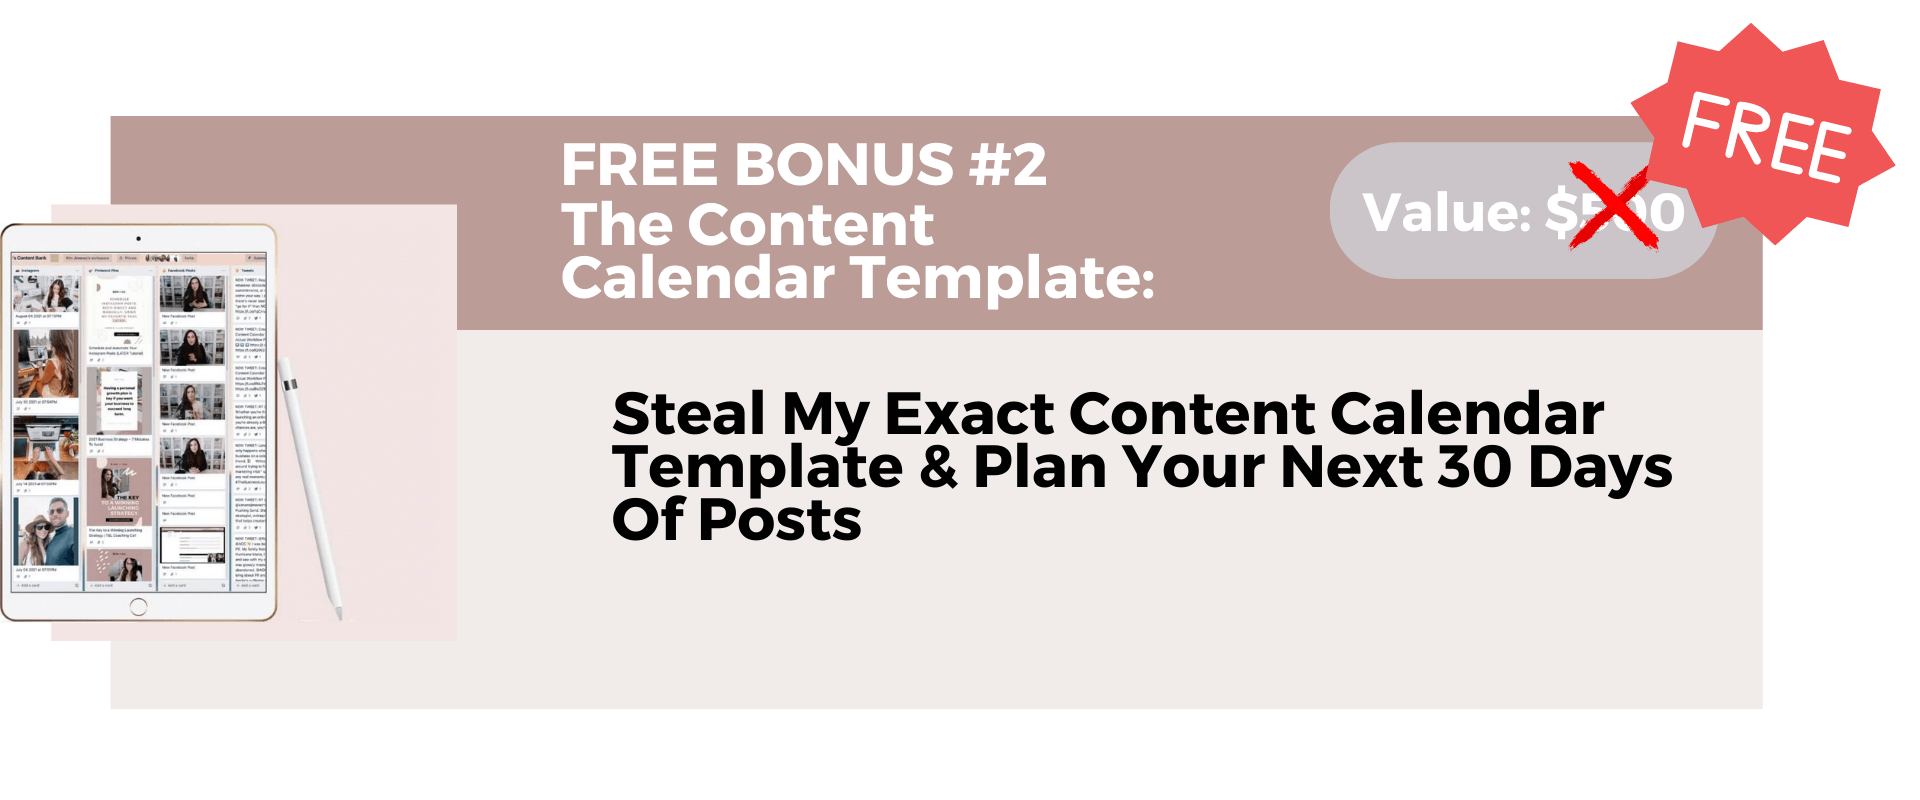 The Content Calendar System 2.0 By Kimberly Ann Jimenez - Free Download Course